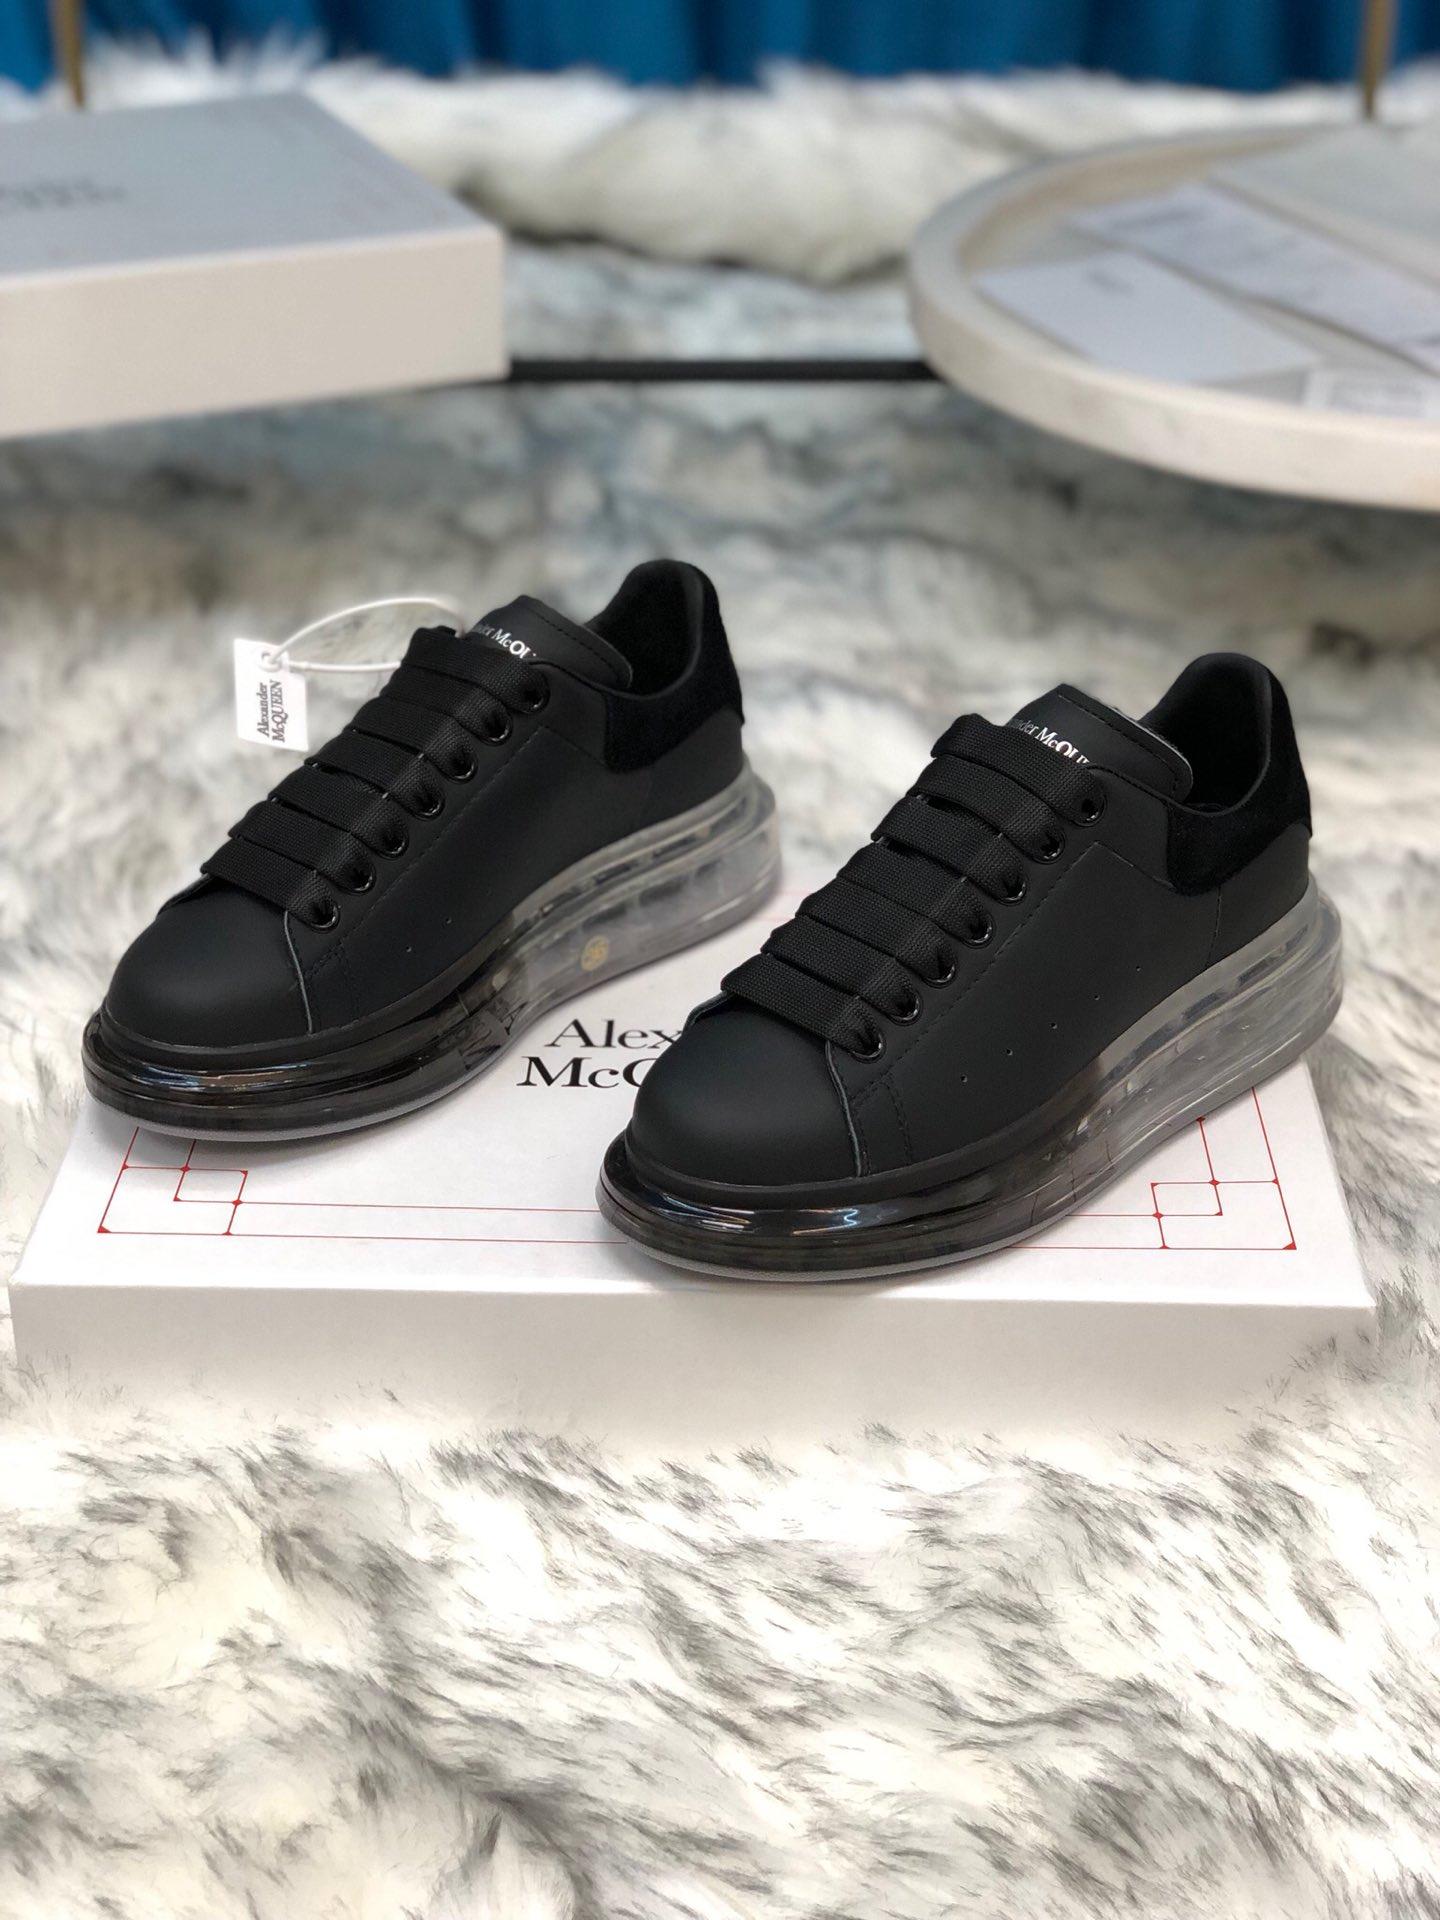 Alexander McQueen Fahion Sneaker Black and black suede heel with transparent sole MS100017